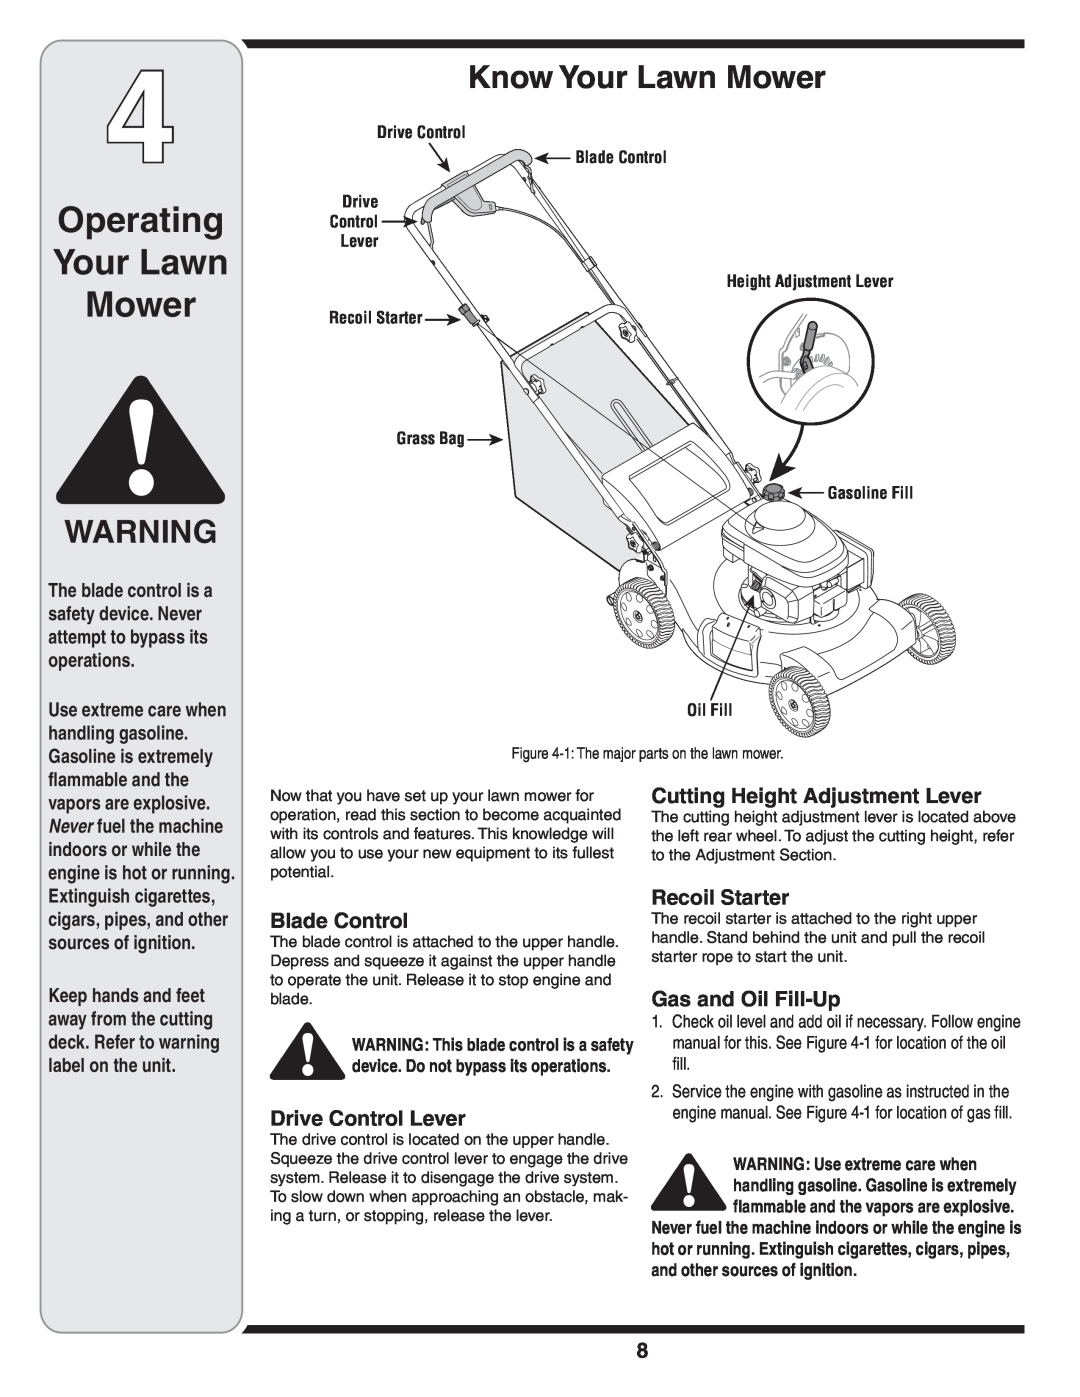 MTD 838 Operating Your Lawn Mower, Know Your Lawn Mower, Cutting Height Adjustment Lever, Blade Control, Recoil Starter 